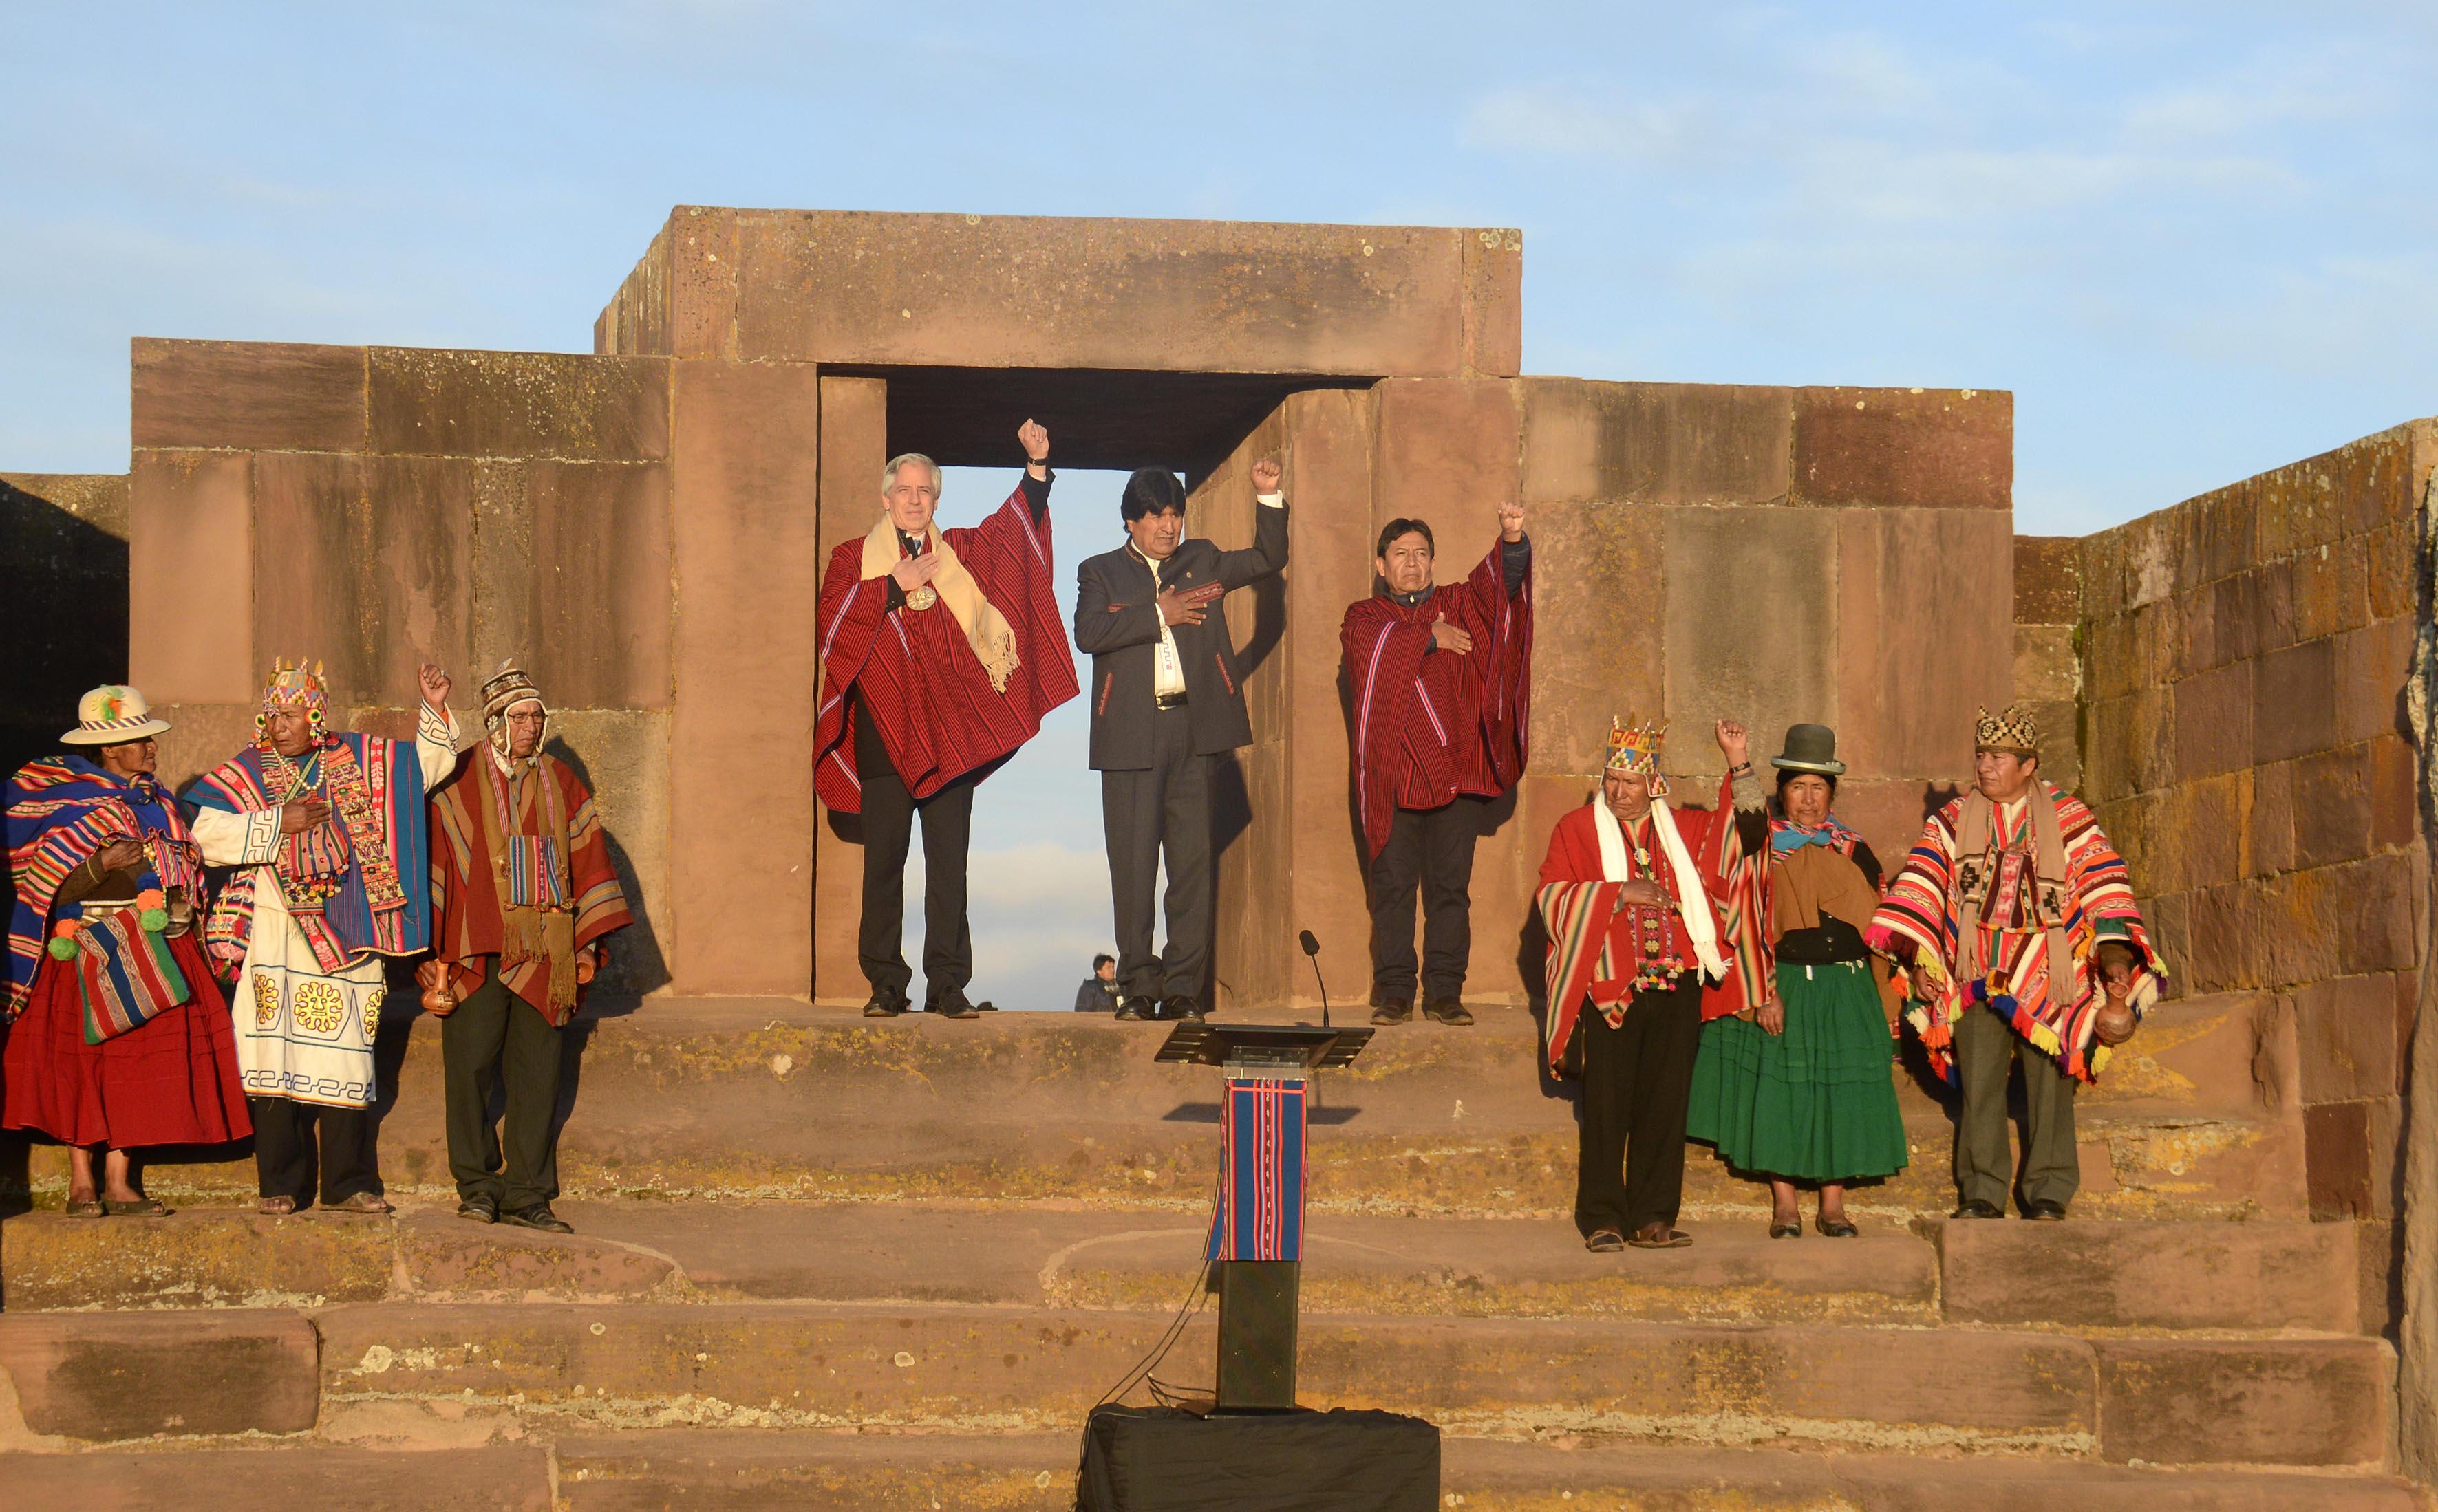 President Morales marks his record in a religious ceremony at Tiwanaku